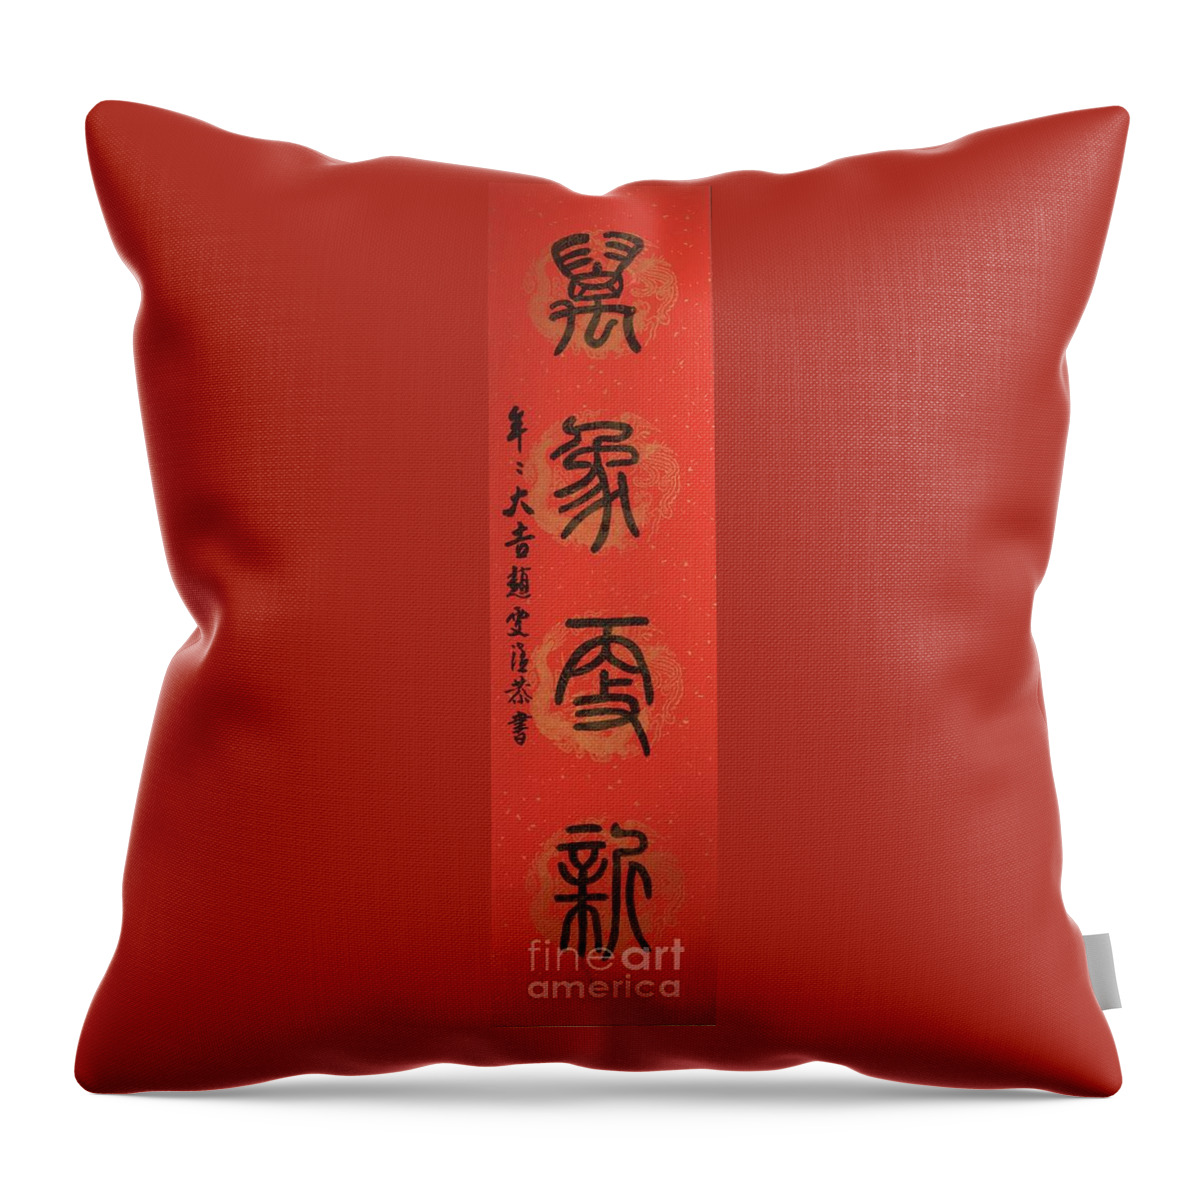 New Year Throw Pillow featuring the painting New Year Celebration Couplet Calligraphy - Left Side by Carmen Lam